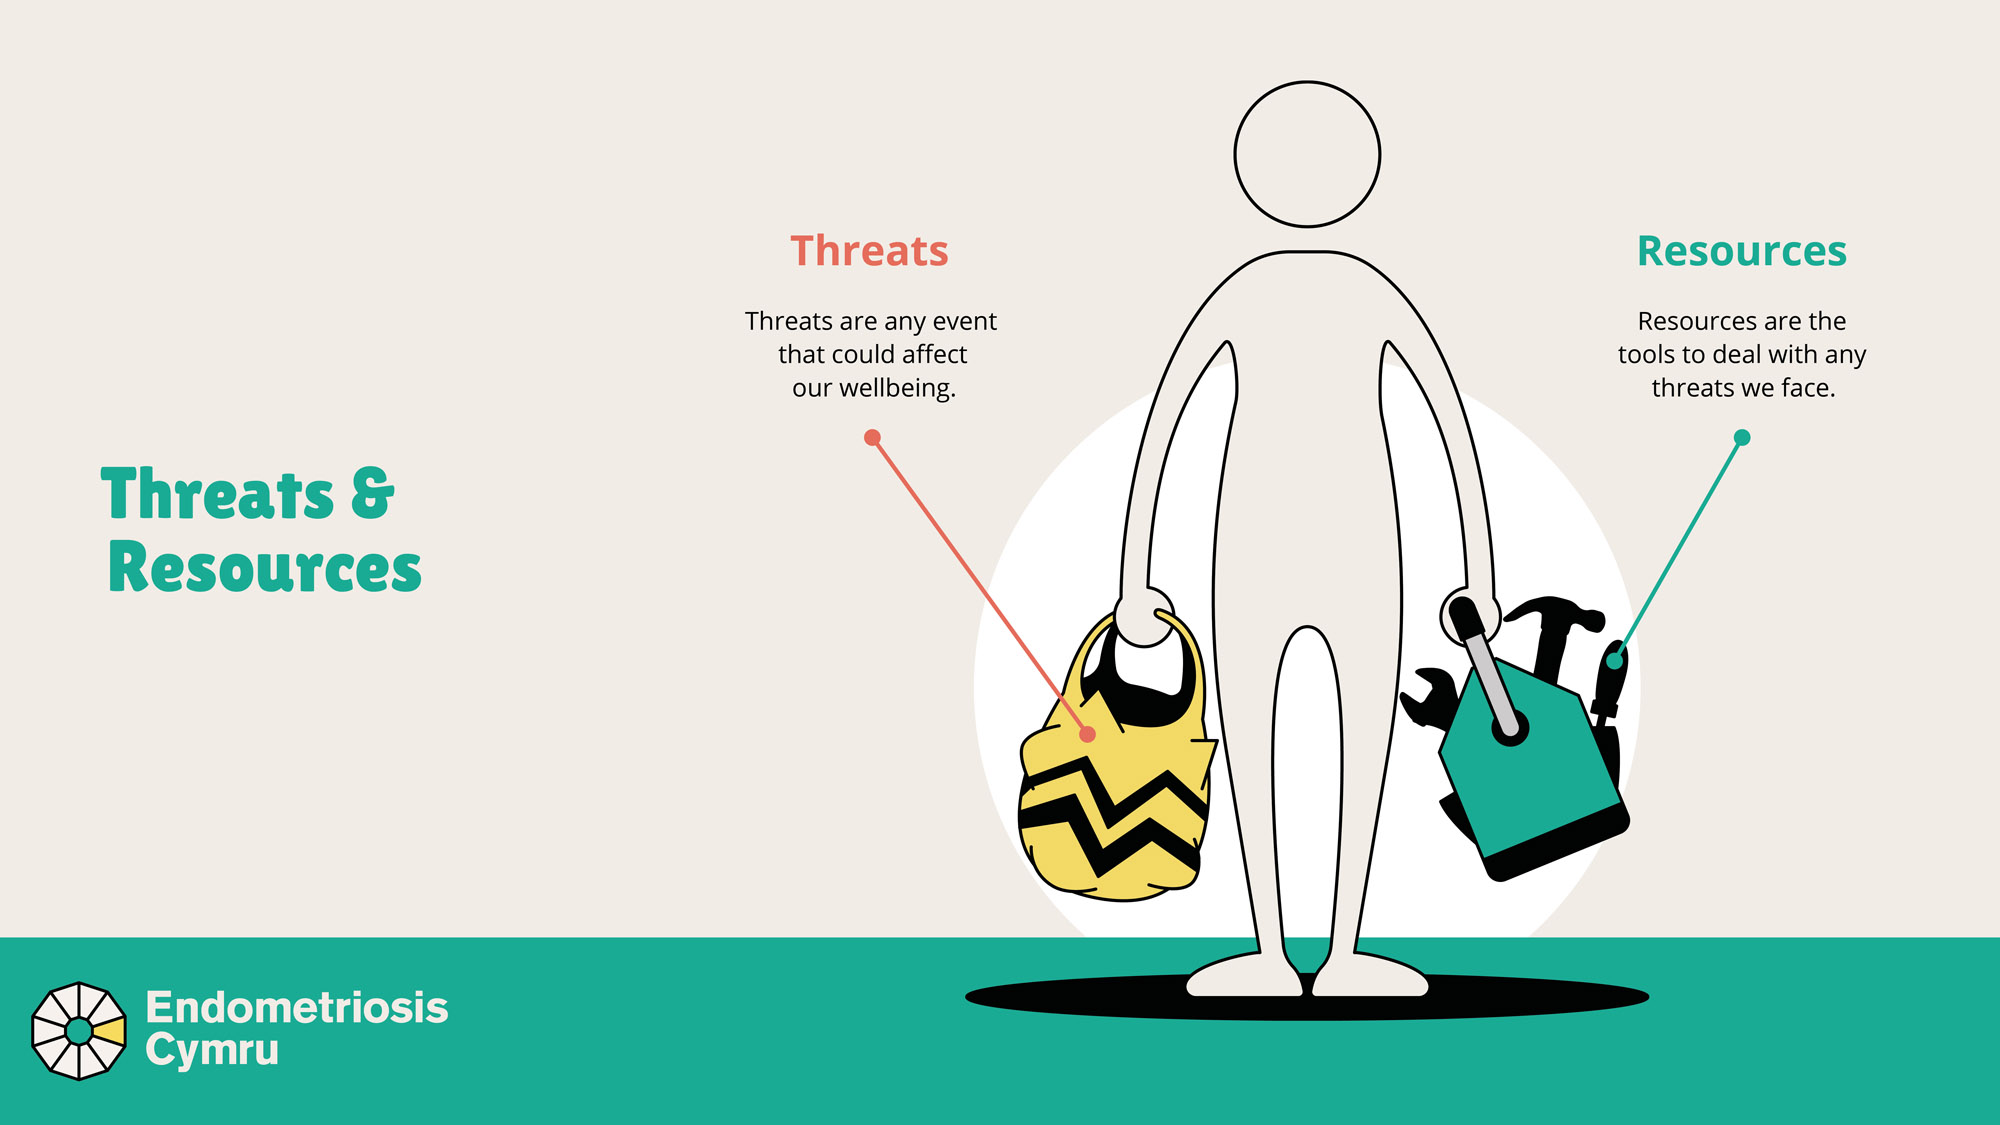 A simple cartoon figure holds a bag representing threats in one hand, and a bag representing resources in the other hand. The bags are equally balanced to demonstrate that we need to have enough coping resources to balance out threats to our wellbeing. 